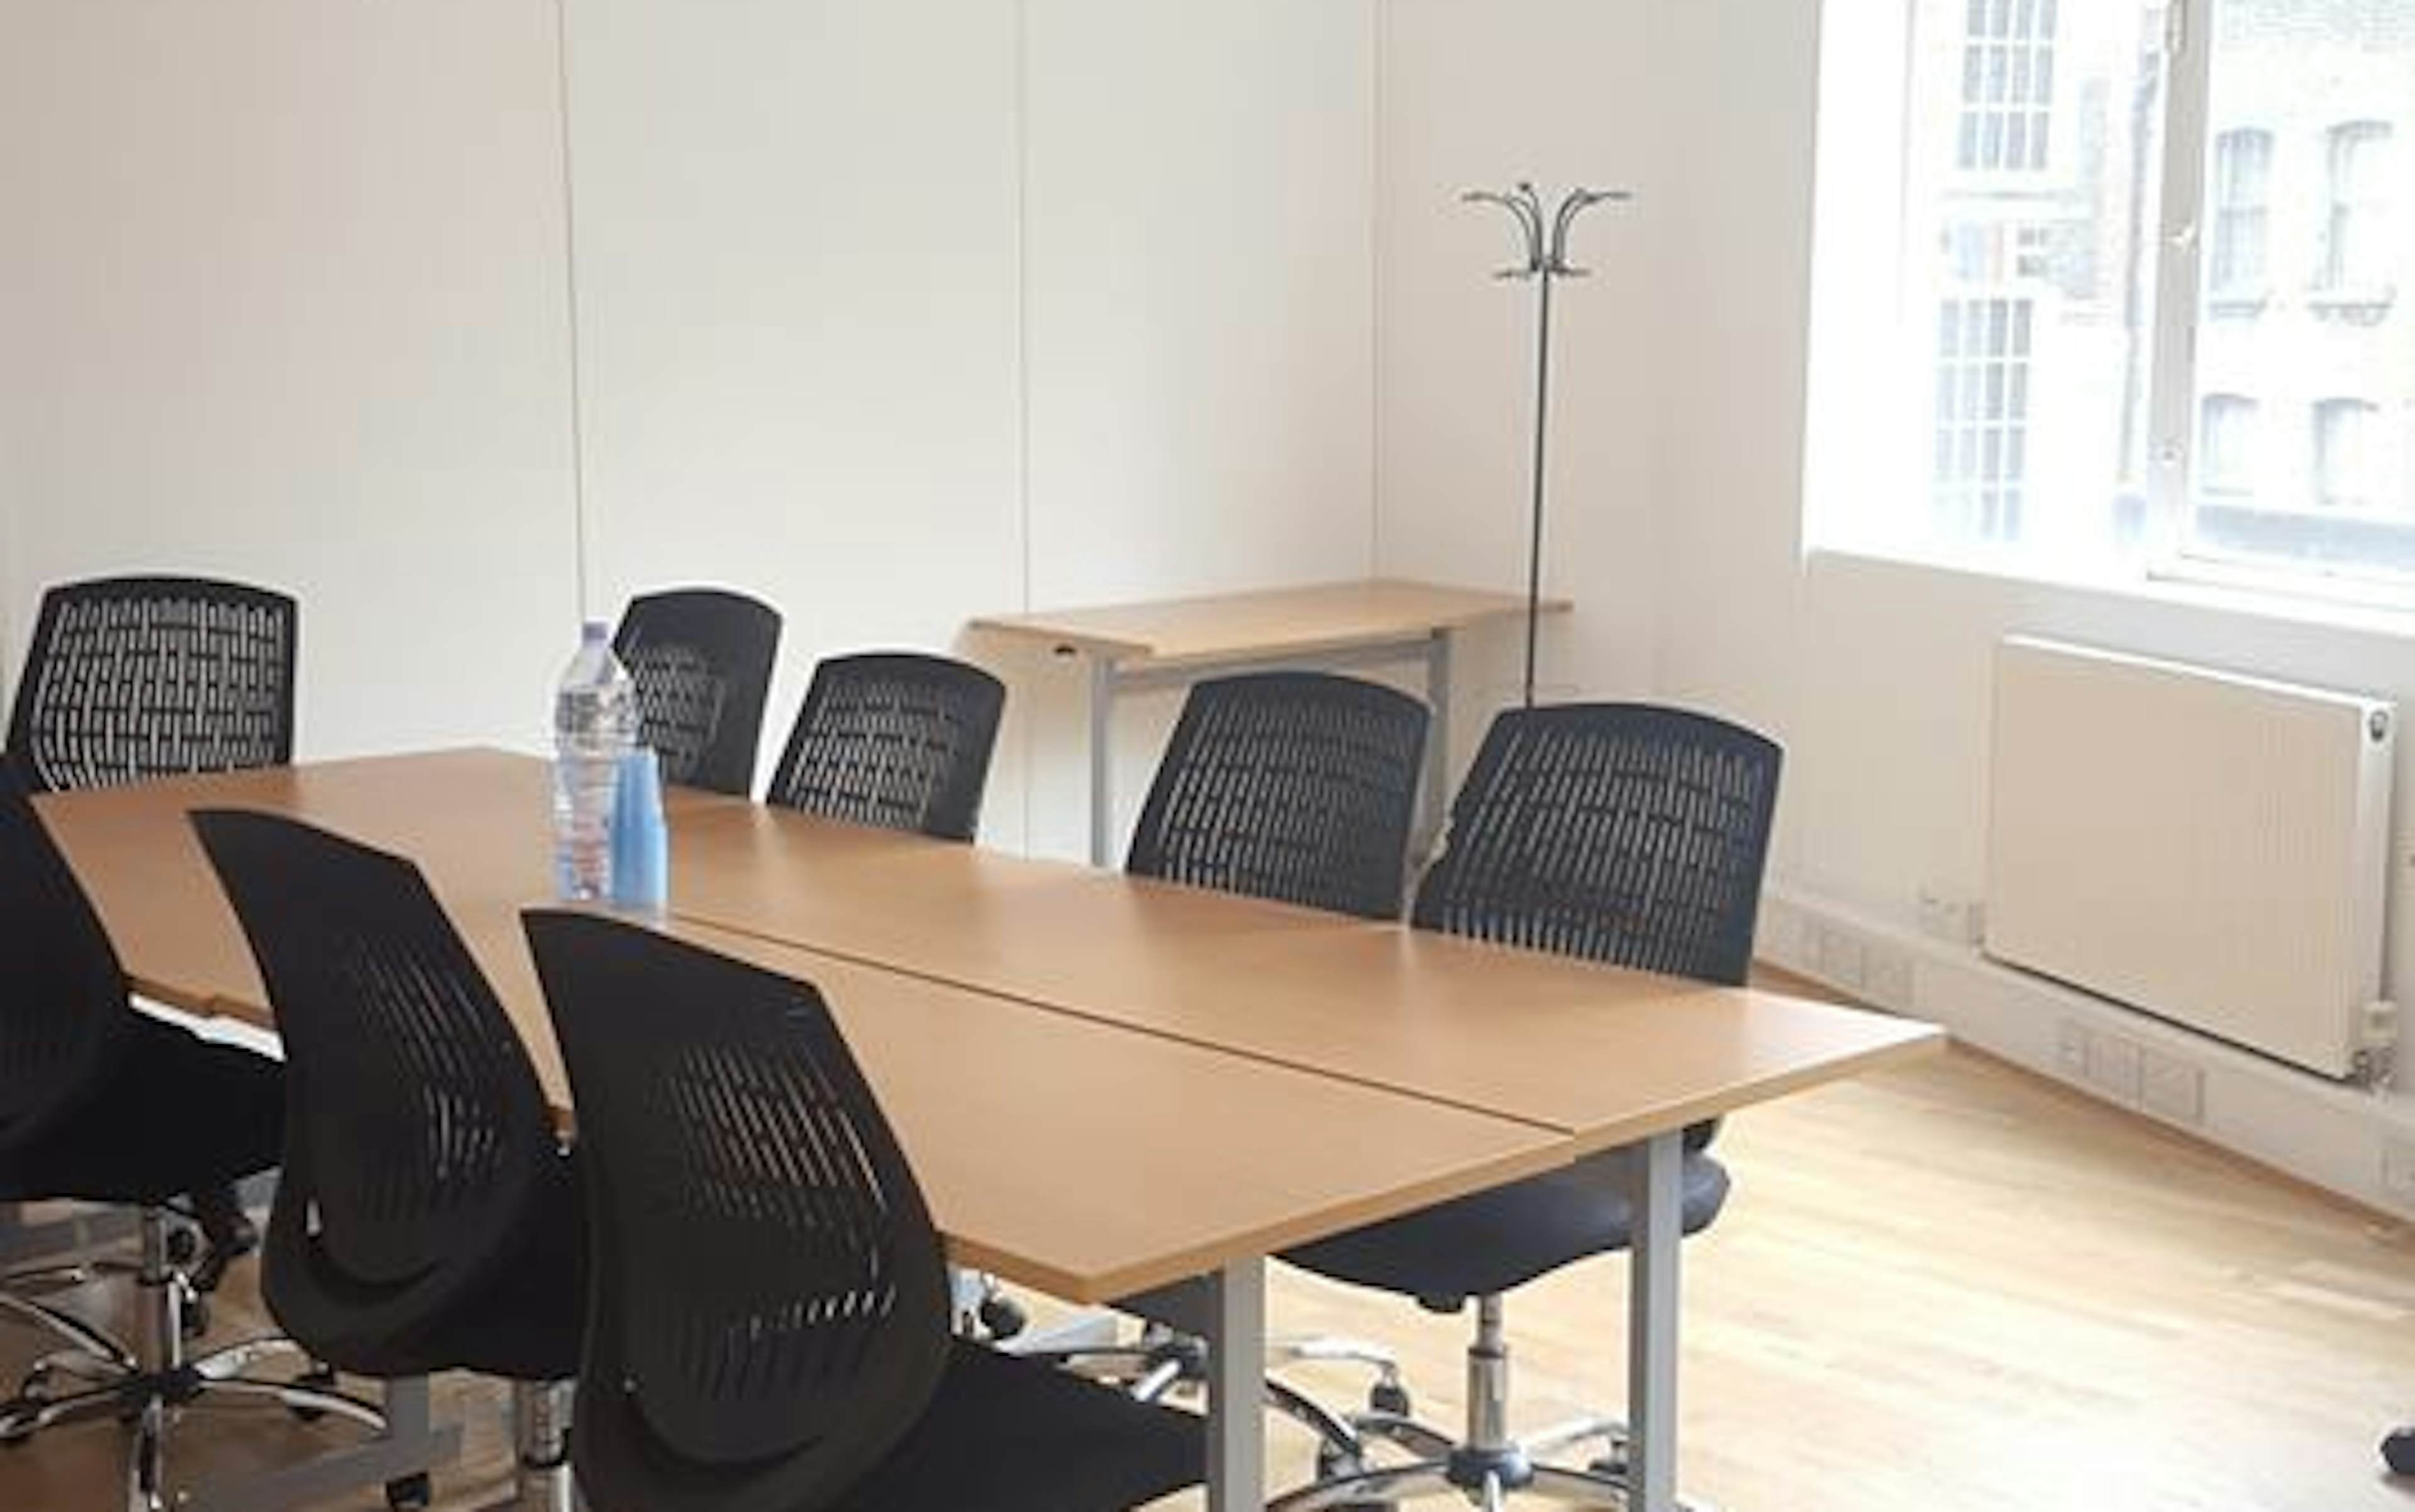 The Training Room Hire Company - Conference / Meeting Room (Medium) image 1